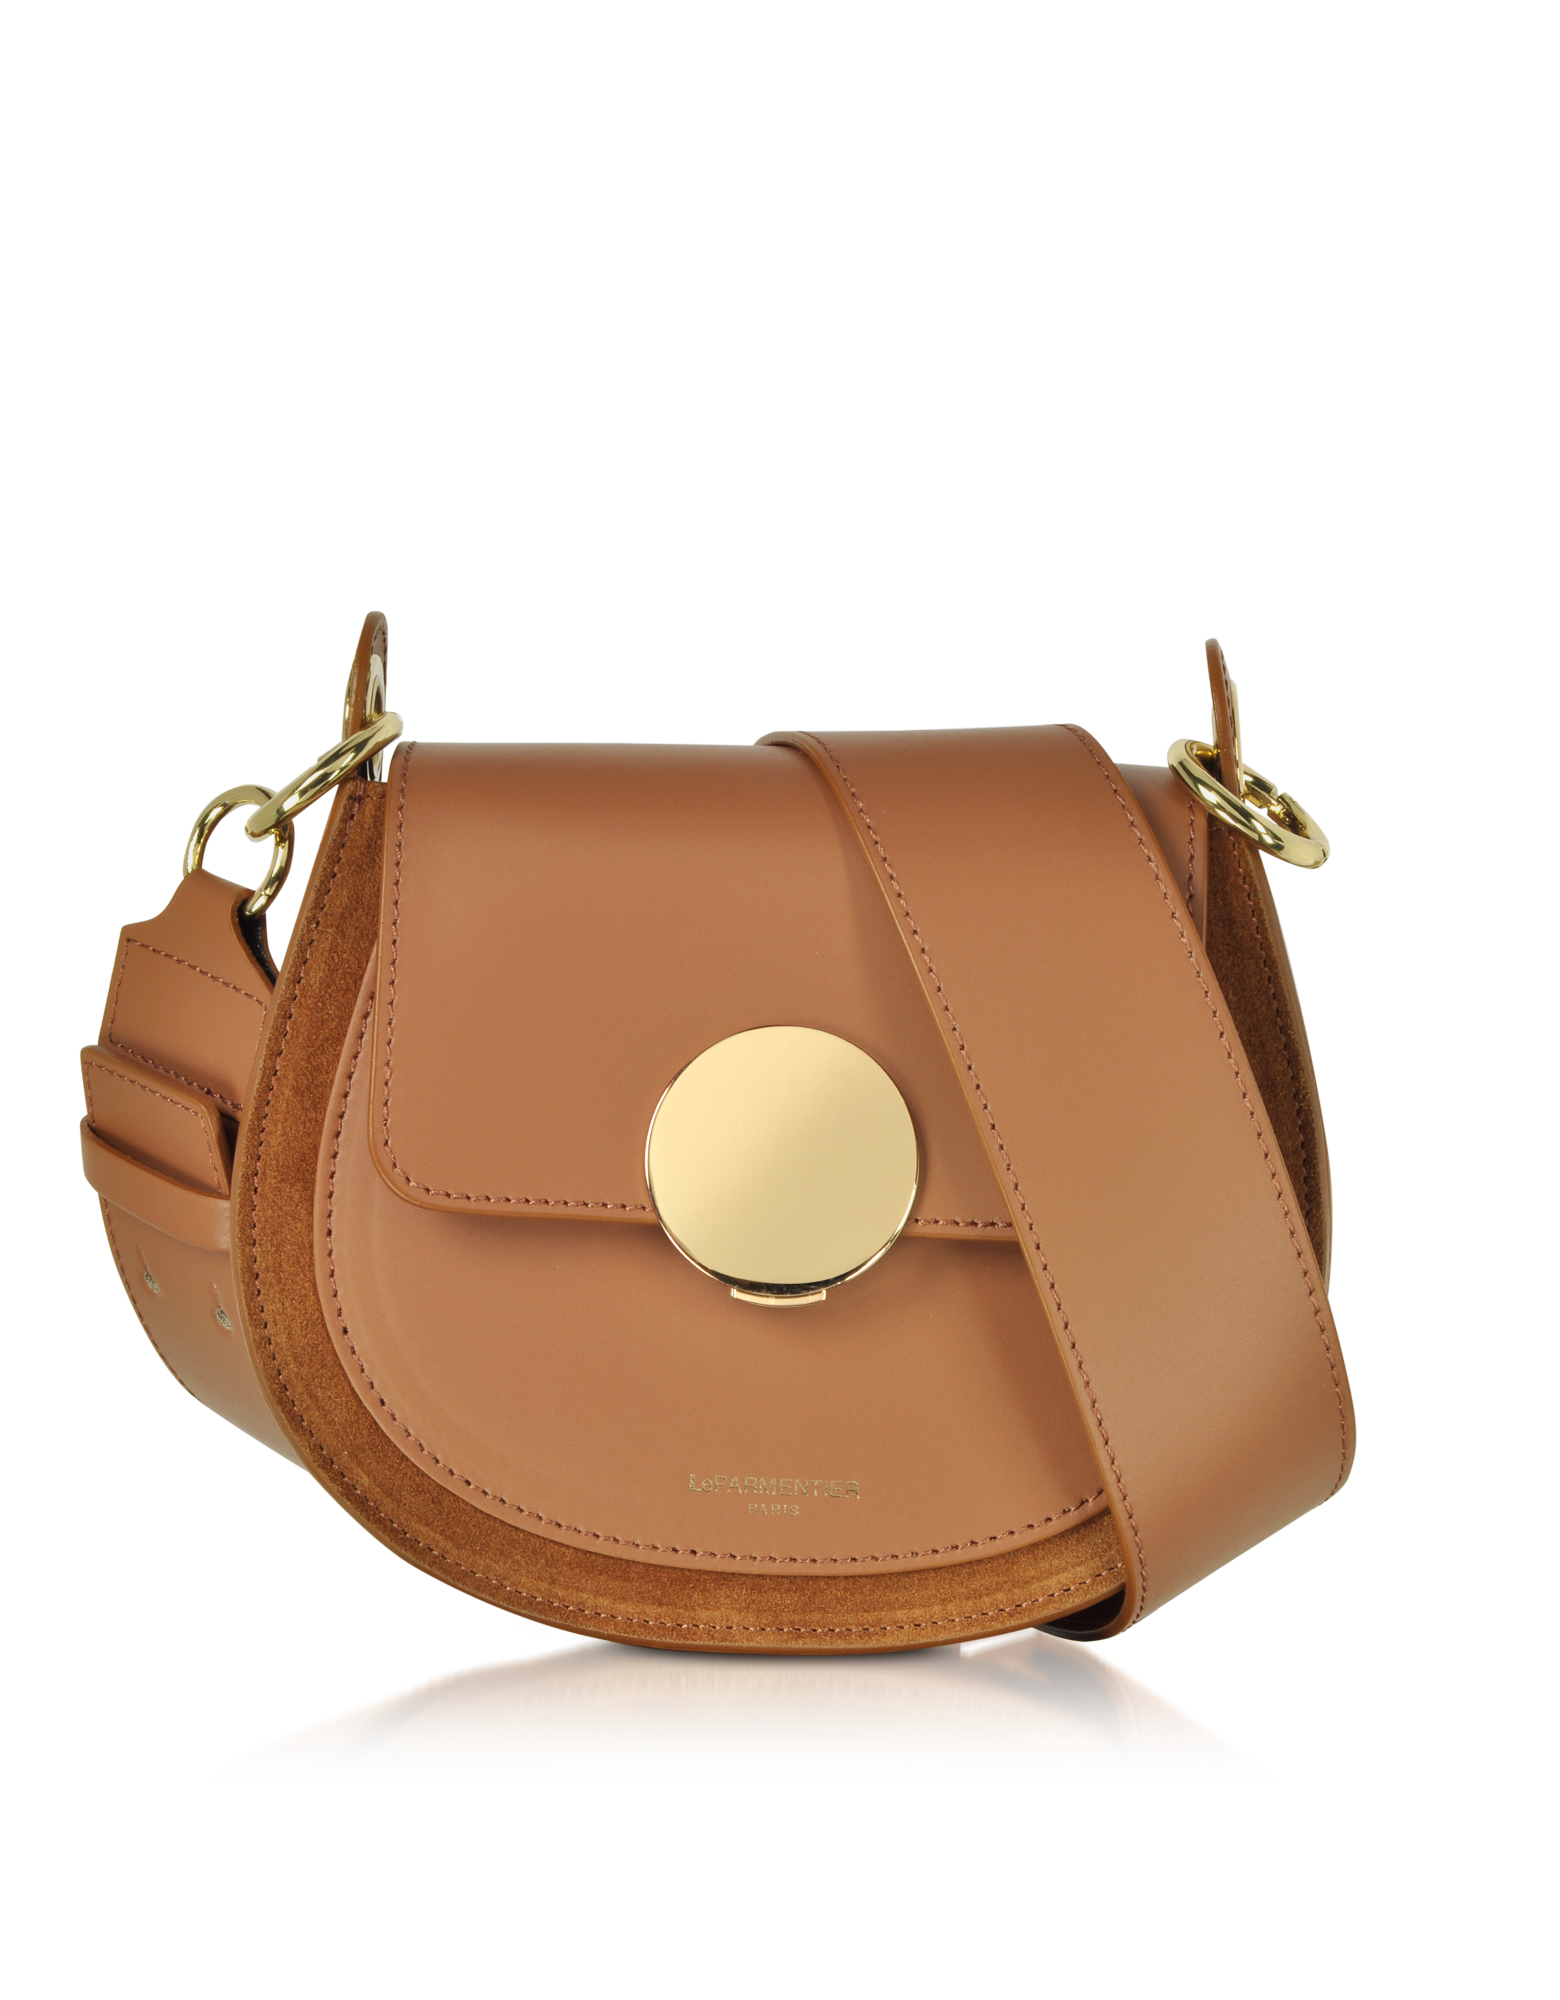 Yucca Suede and Leather Shoulder Bag